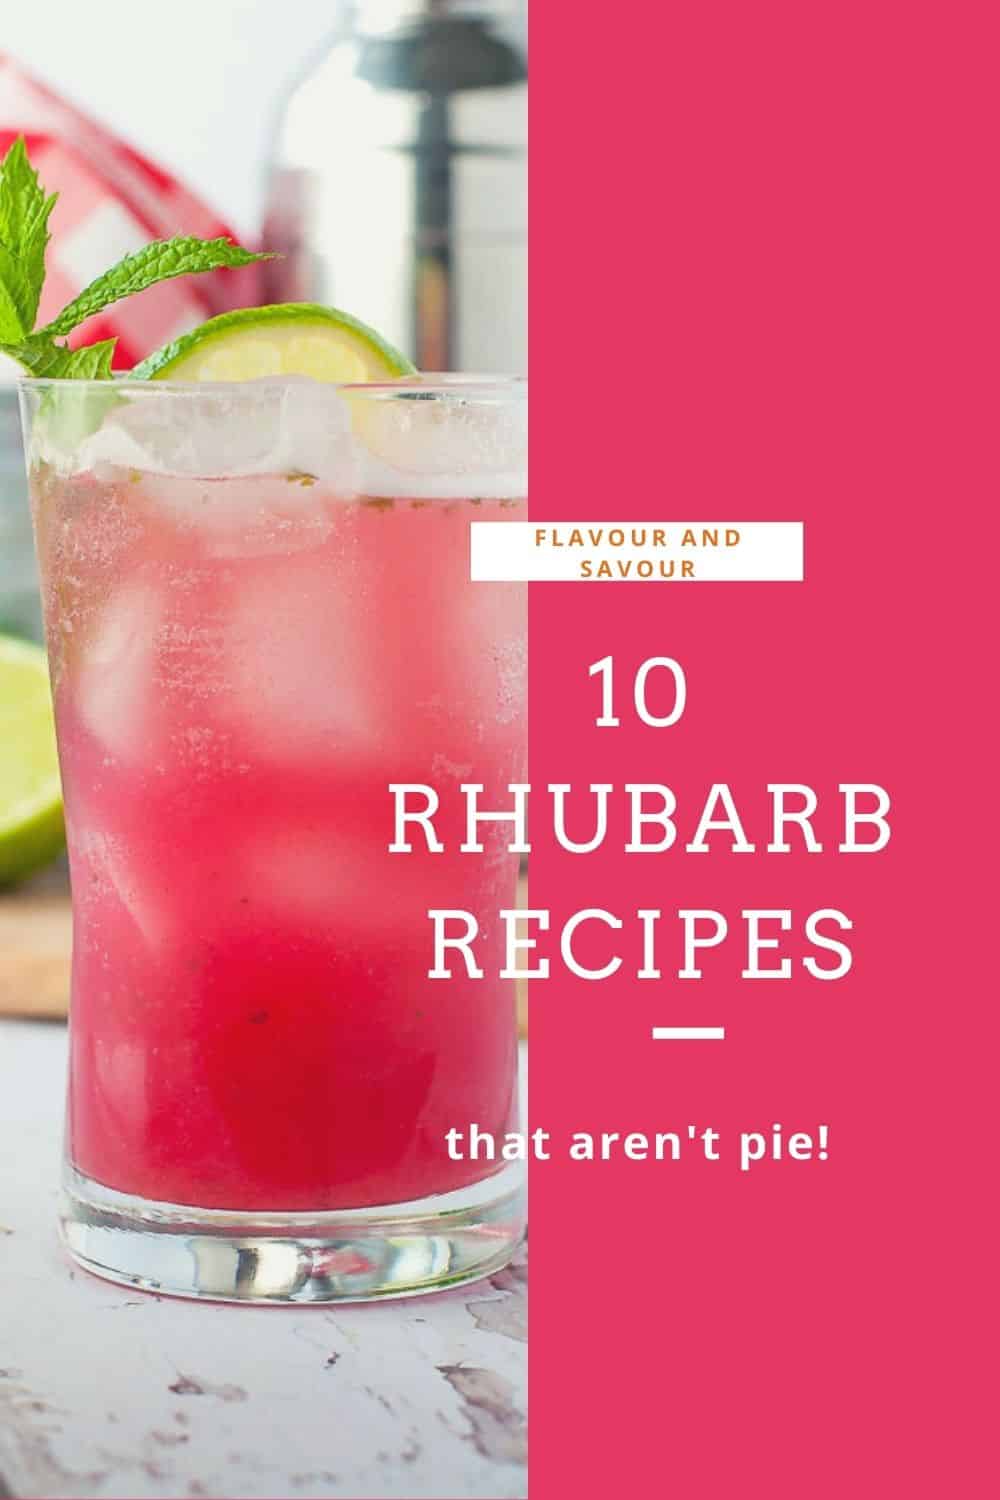 Image with text overlay for 10 ways to use rhubarb.